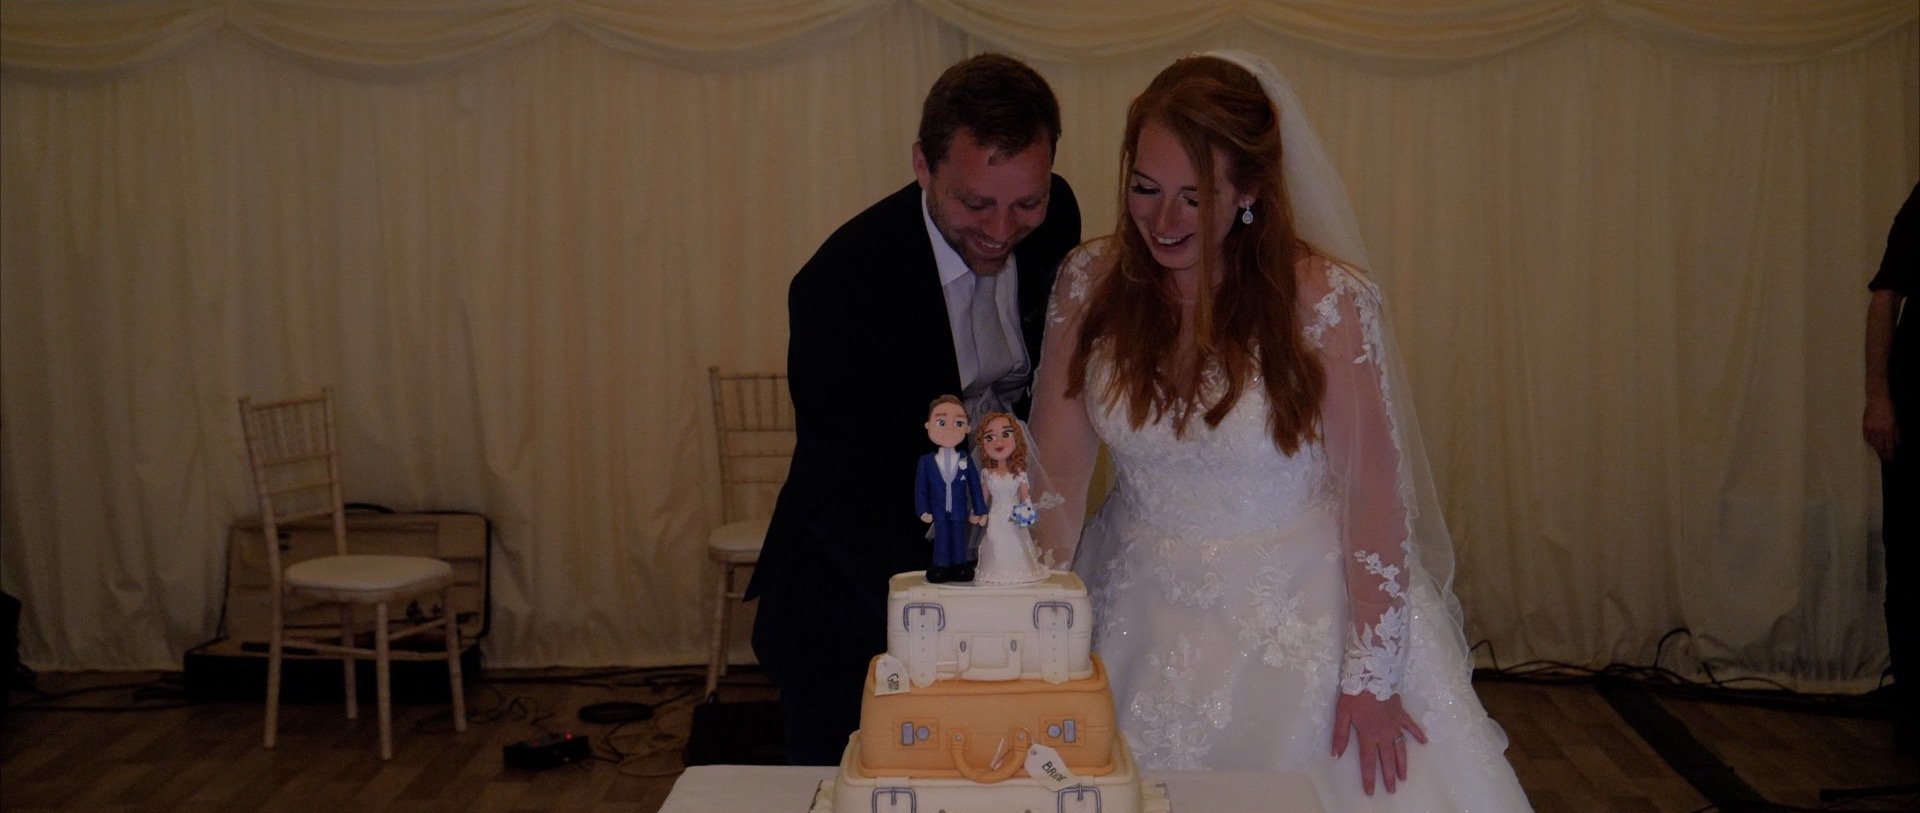 Cutting the cake at Mulberry House Ongar.jpg